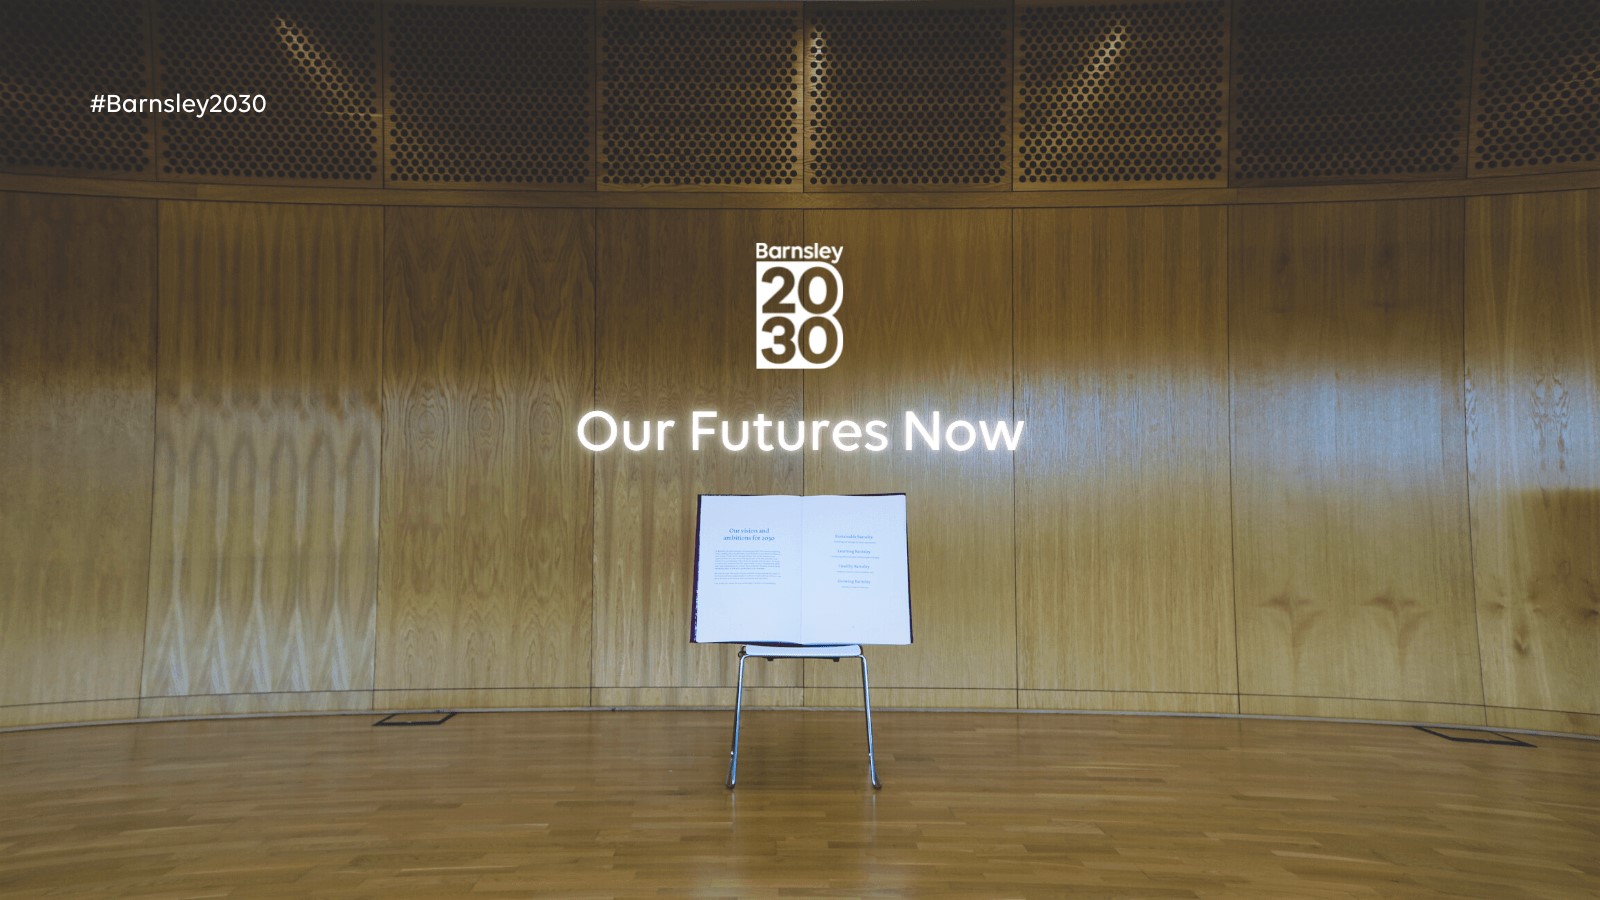 'Our Futures Now' in white neon light above an easel with a large, open book on it